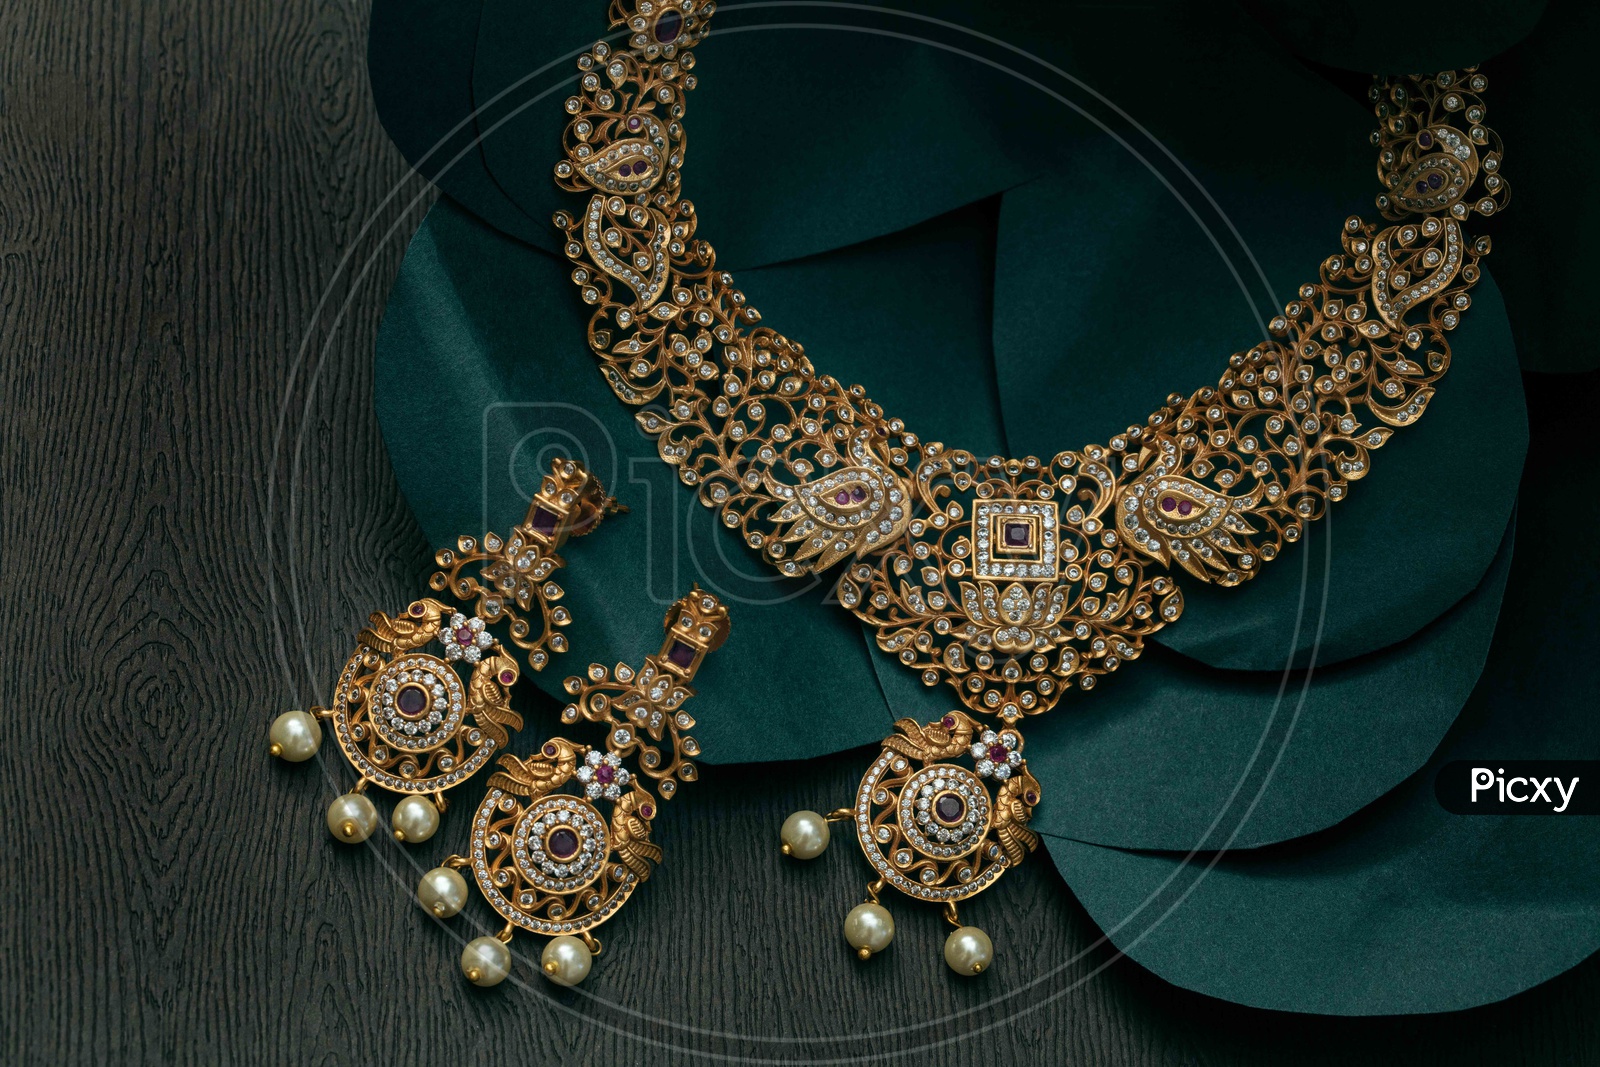 Traditional choker necklace set with pearls